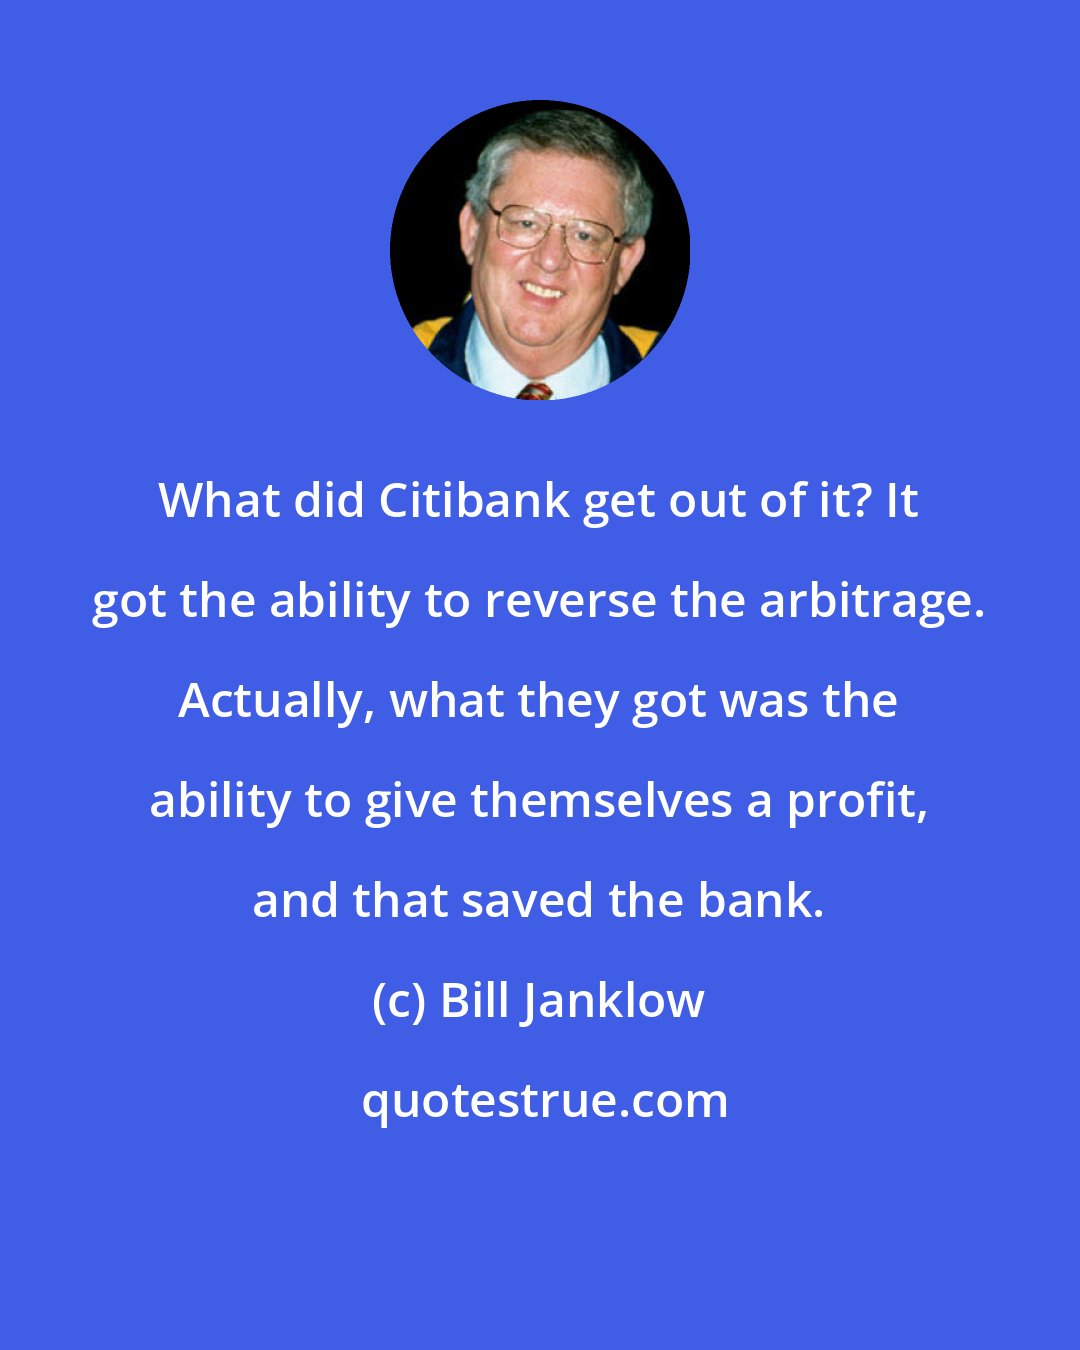 Bill Janklow: What did Citibank get out of it? It got the ability to reverse the arbitrage. Actually, what they got was the ability to give themselves a profit, and that saved the bank.